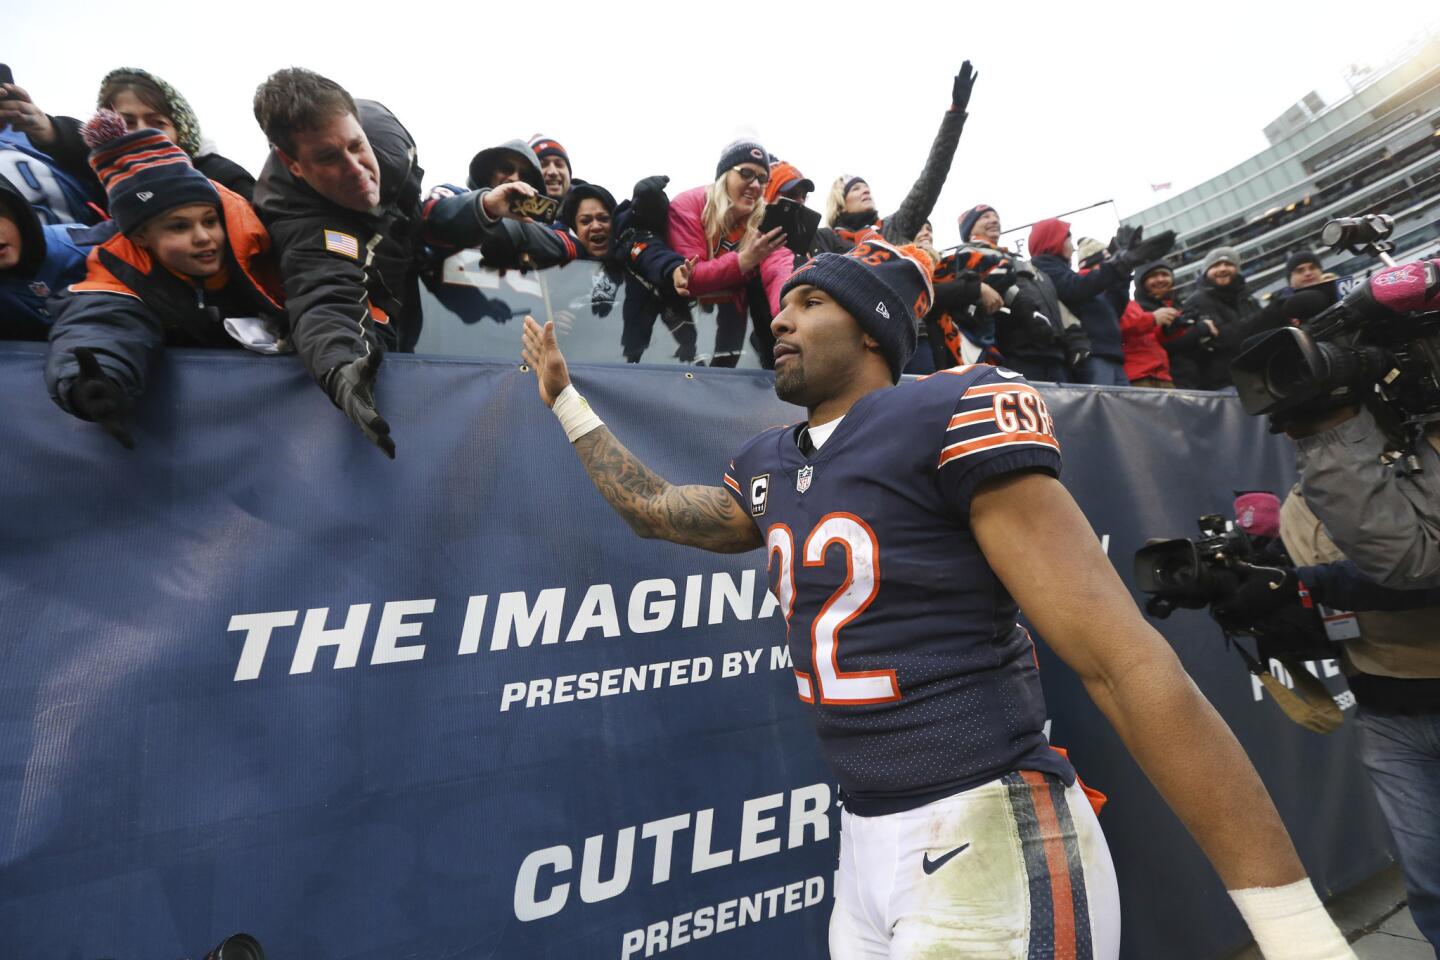 Matt Forte high-fives fans before walking off the field following his team's 24-20 loss to the Lions.